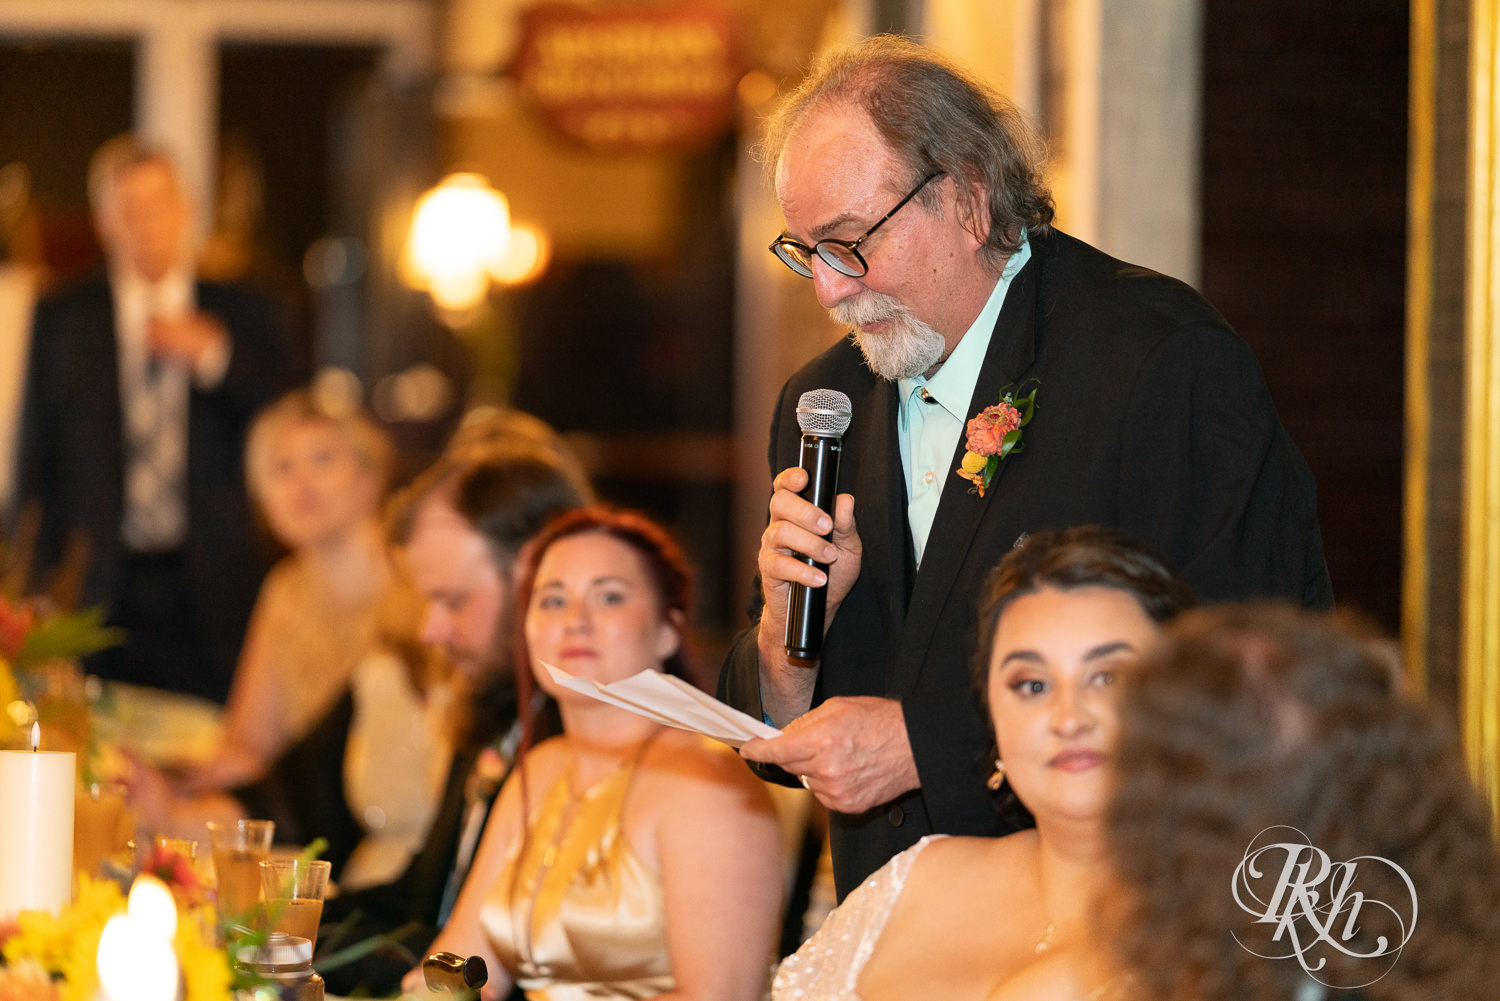 Dad gives speech at wedding reception at Kellerman's Event Center in White Bear Lake, Minnesota.